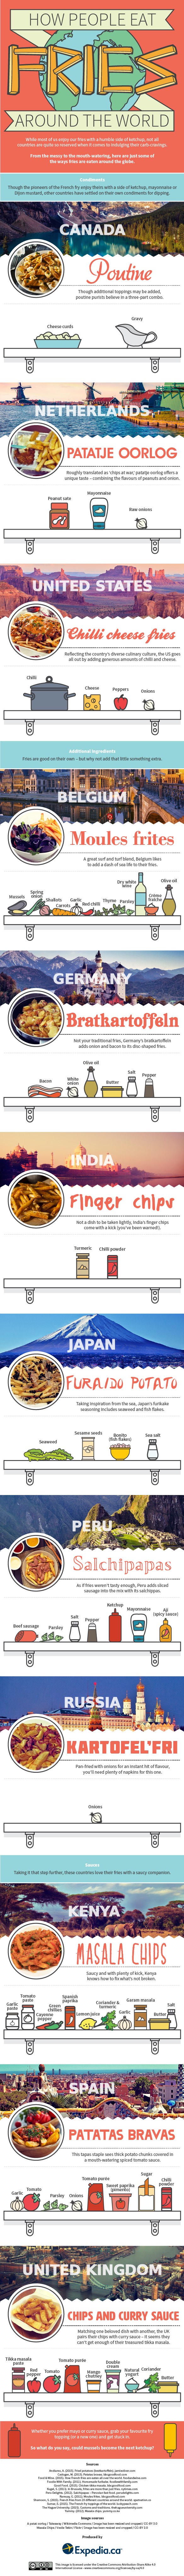 Fries-from-around-the-world